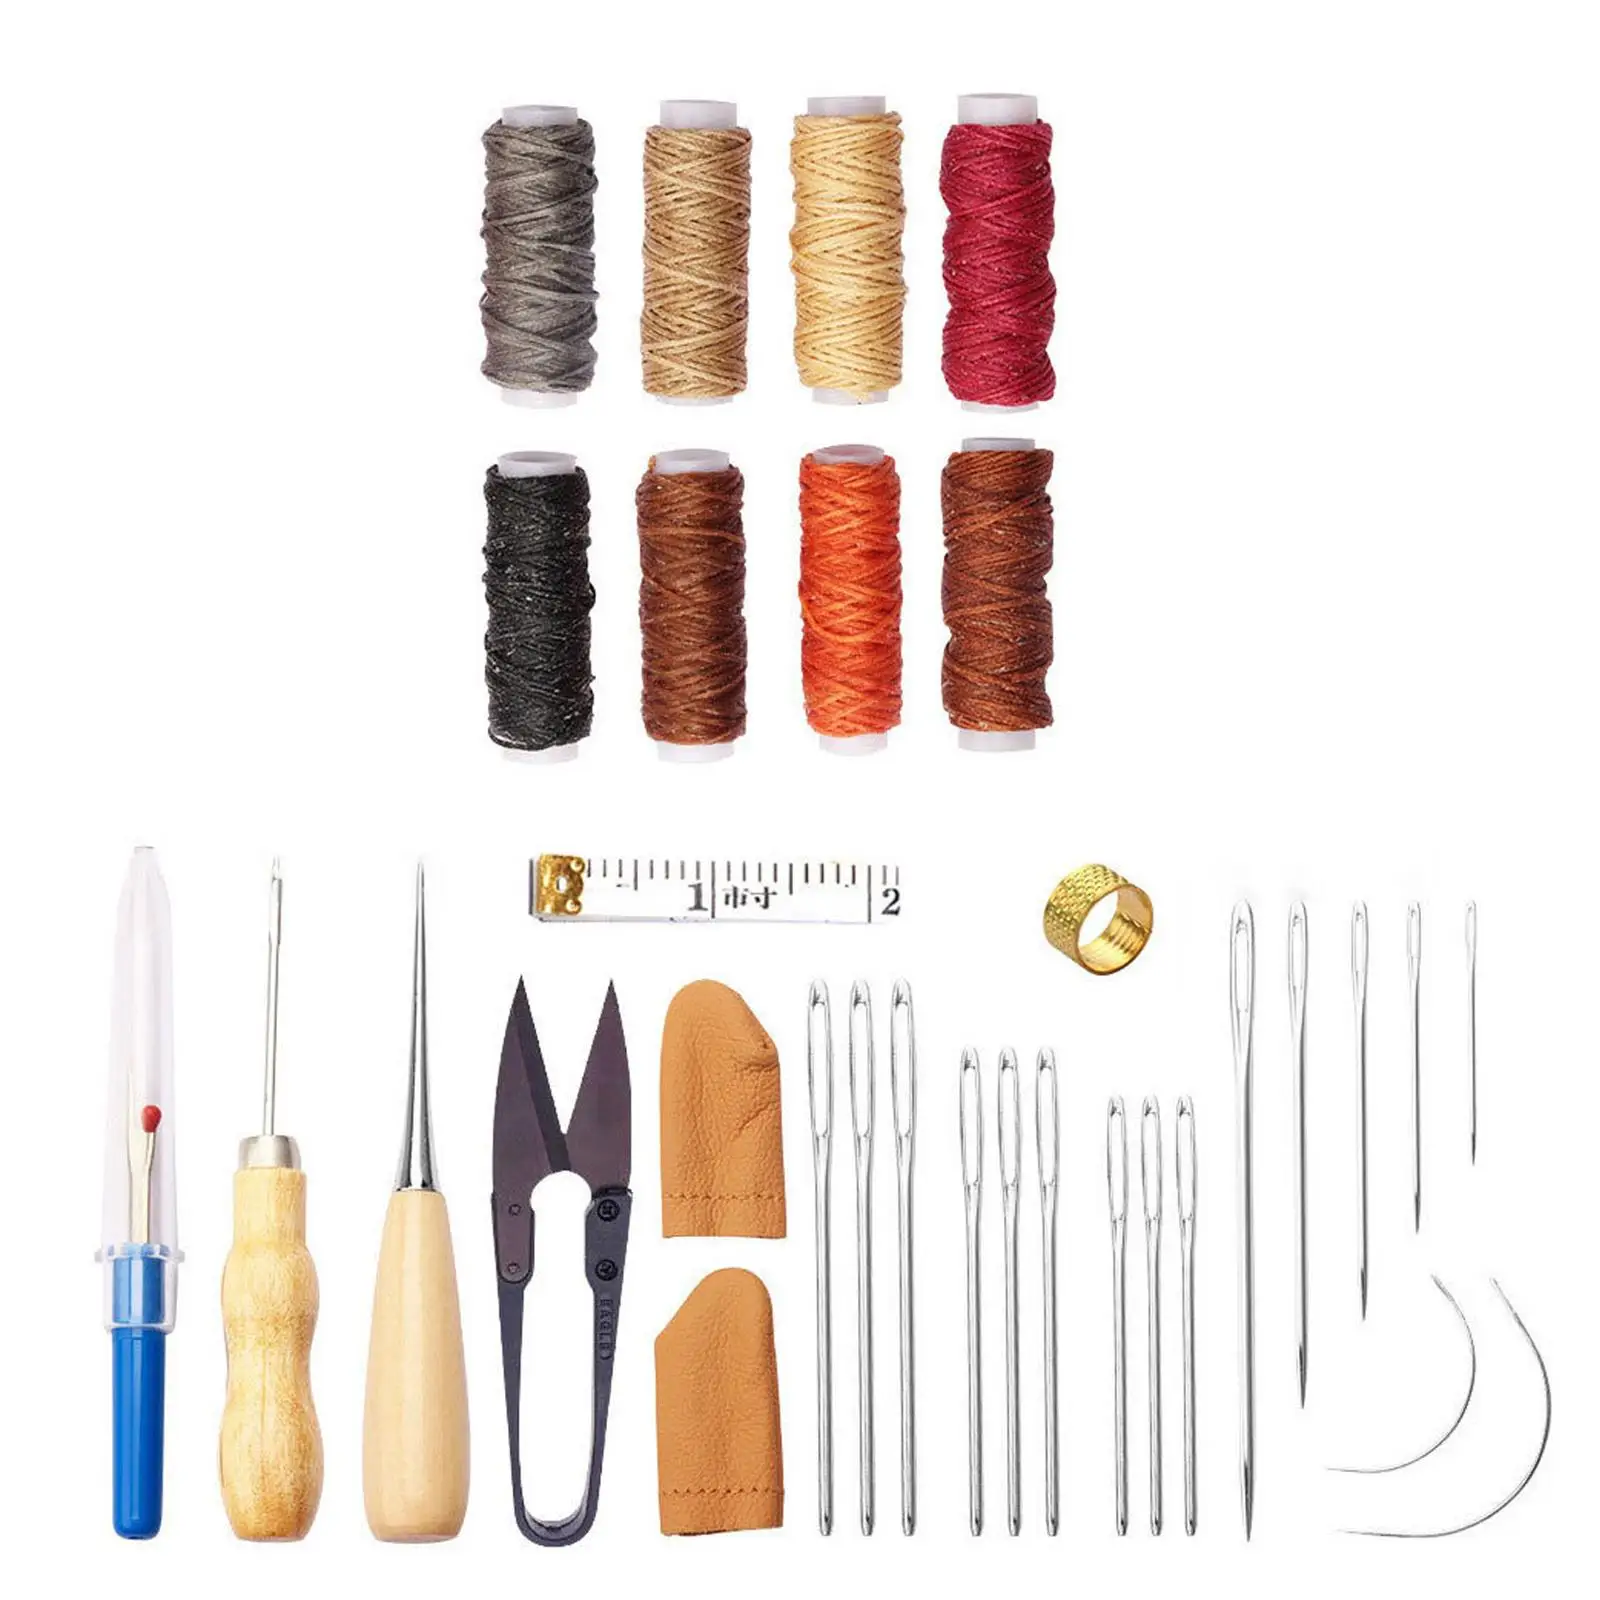 32x Leather Tools Kit Large Eye Stitching Needles Leathercraft Accessories DIY Leather Hand Stitching Leather Working Tools